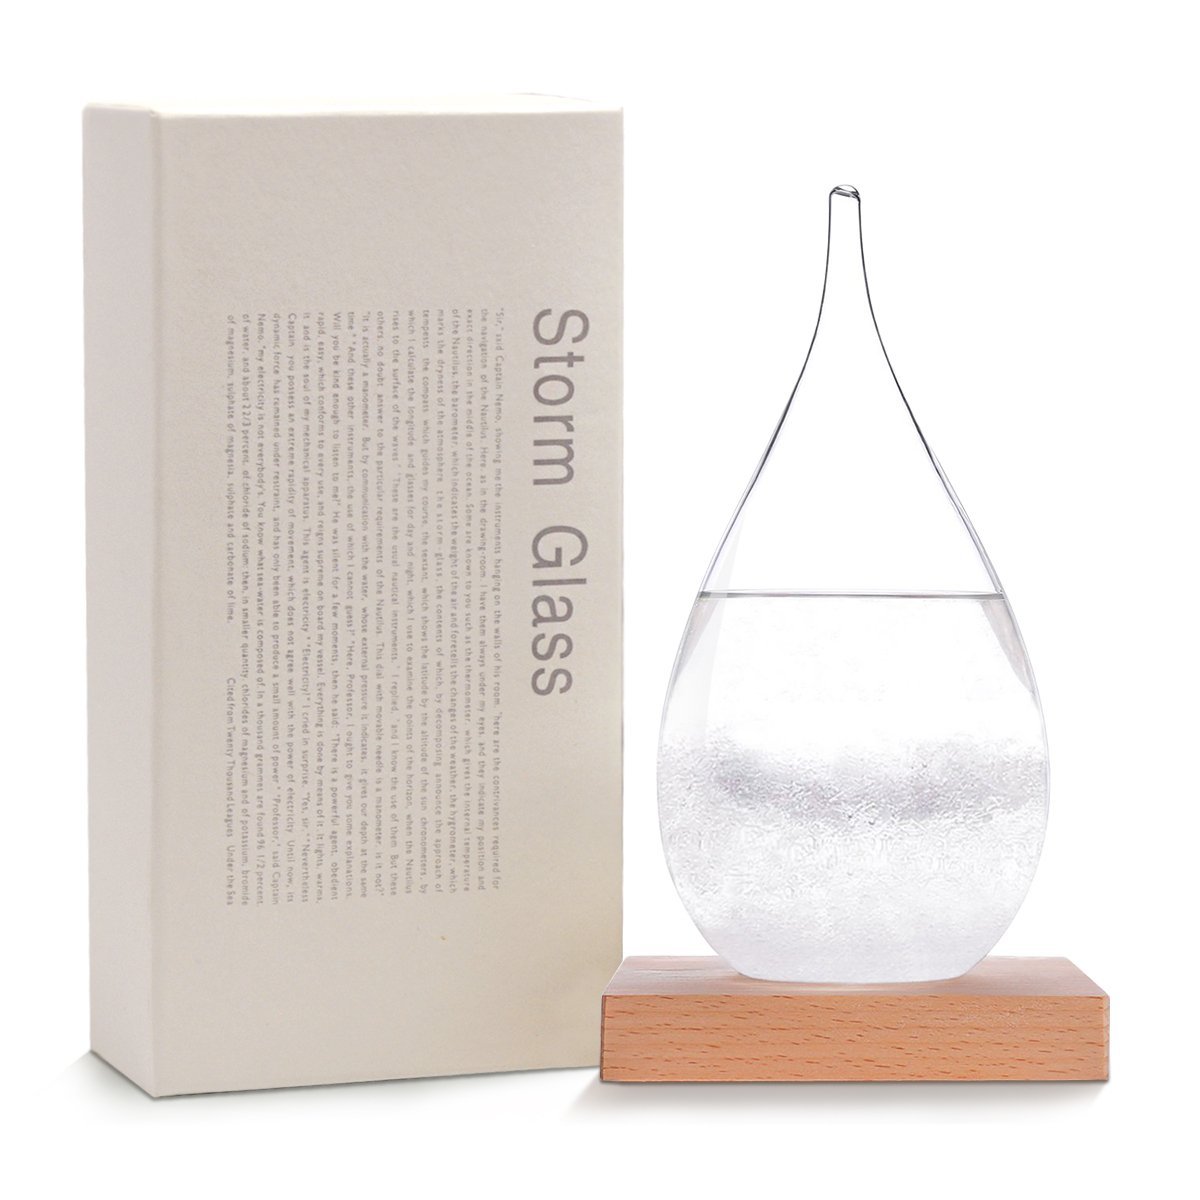 Use this weather predictor as a conversation starter.</br>A <a href="https://amzn.to/2rNjbAS">storm glass barometer</a> looks pimp and only costs $26.99.